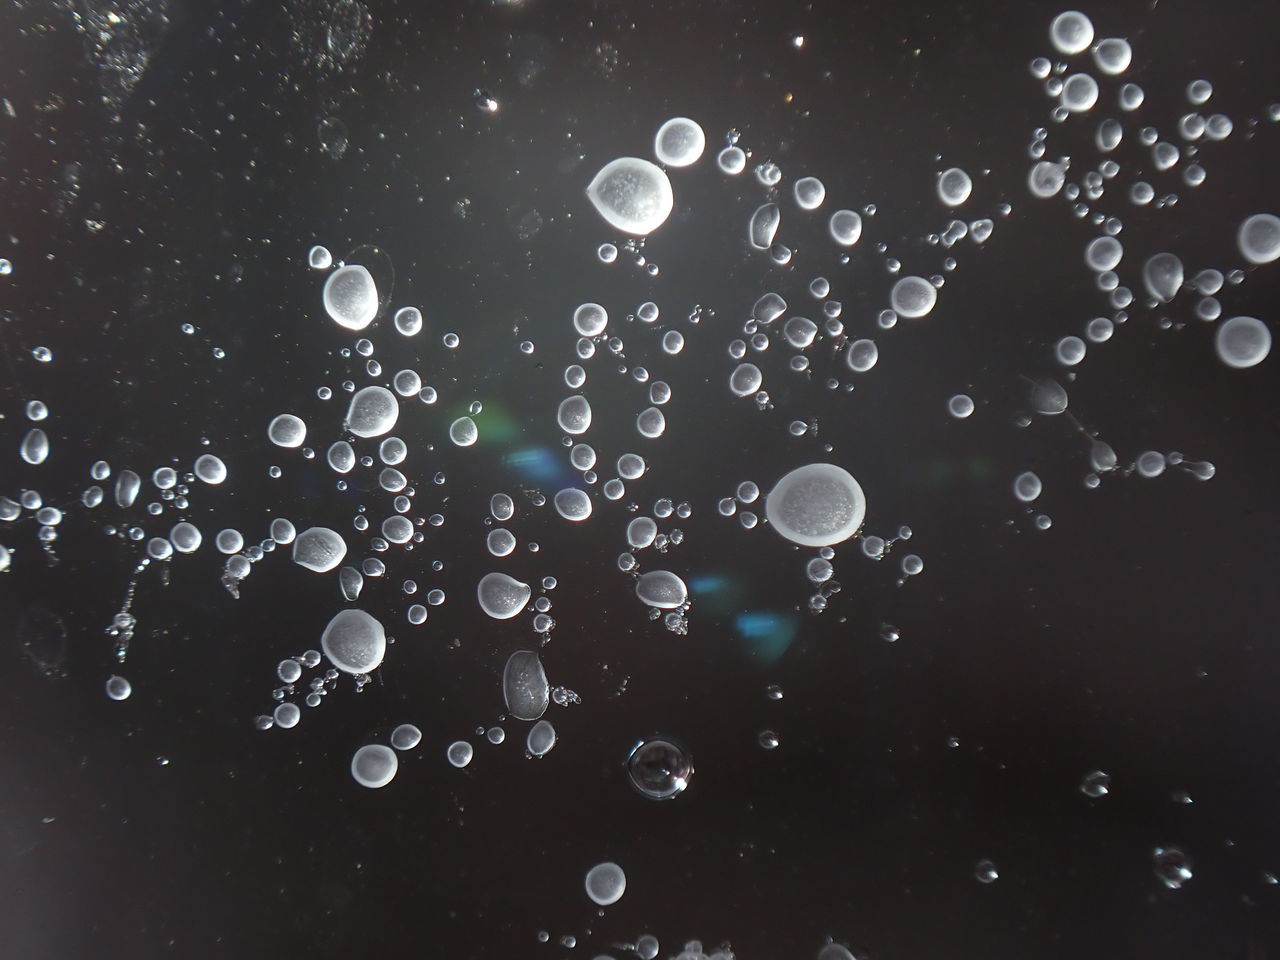 FULL FRAME SHOT OF WATER DROPS ON BUBBLES